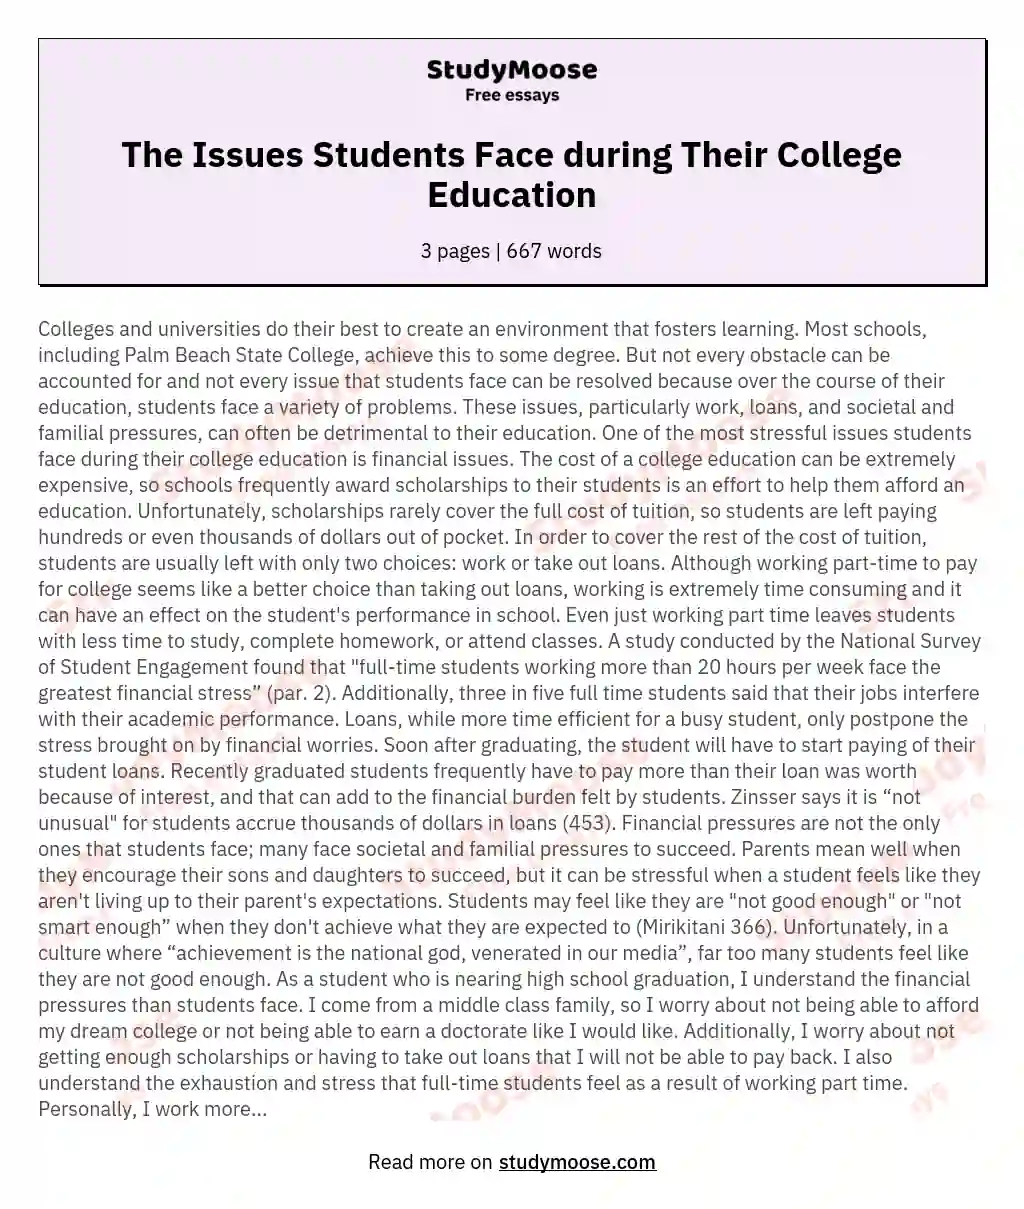 The Issues Students Face during Their College Education essay